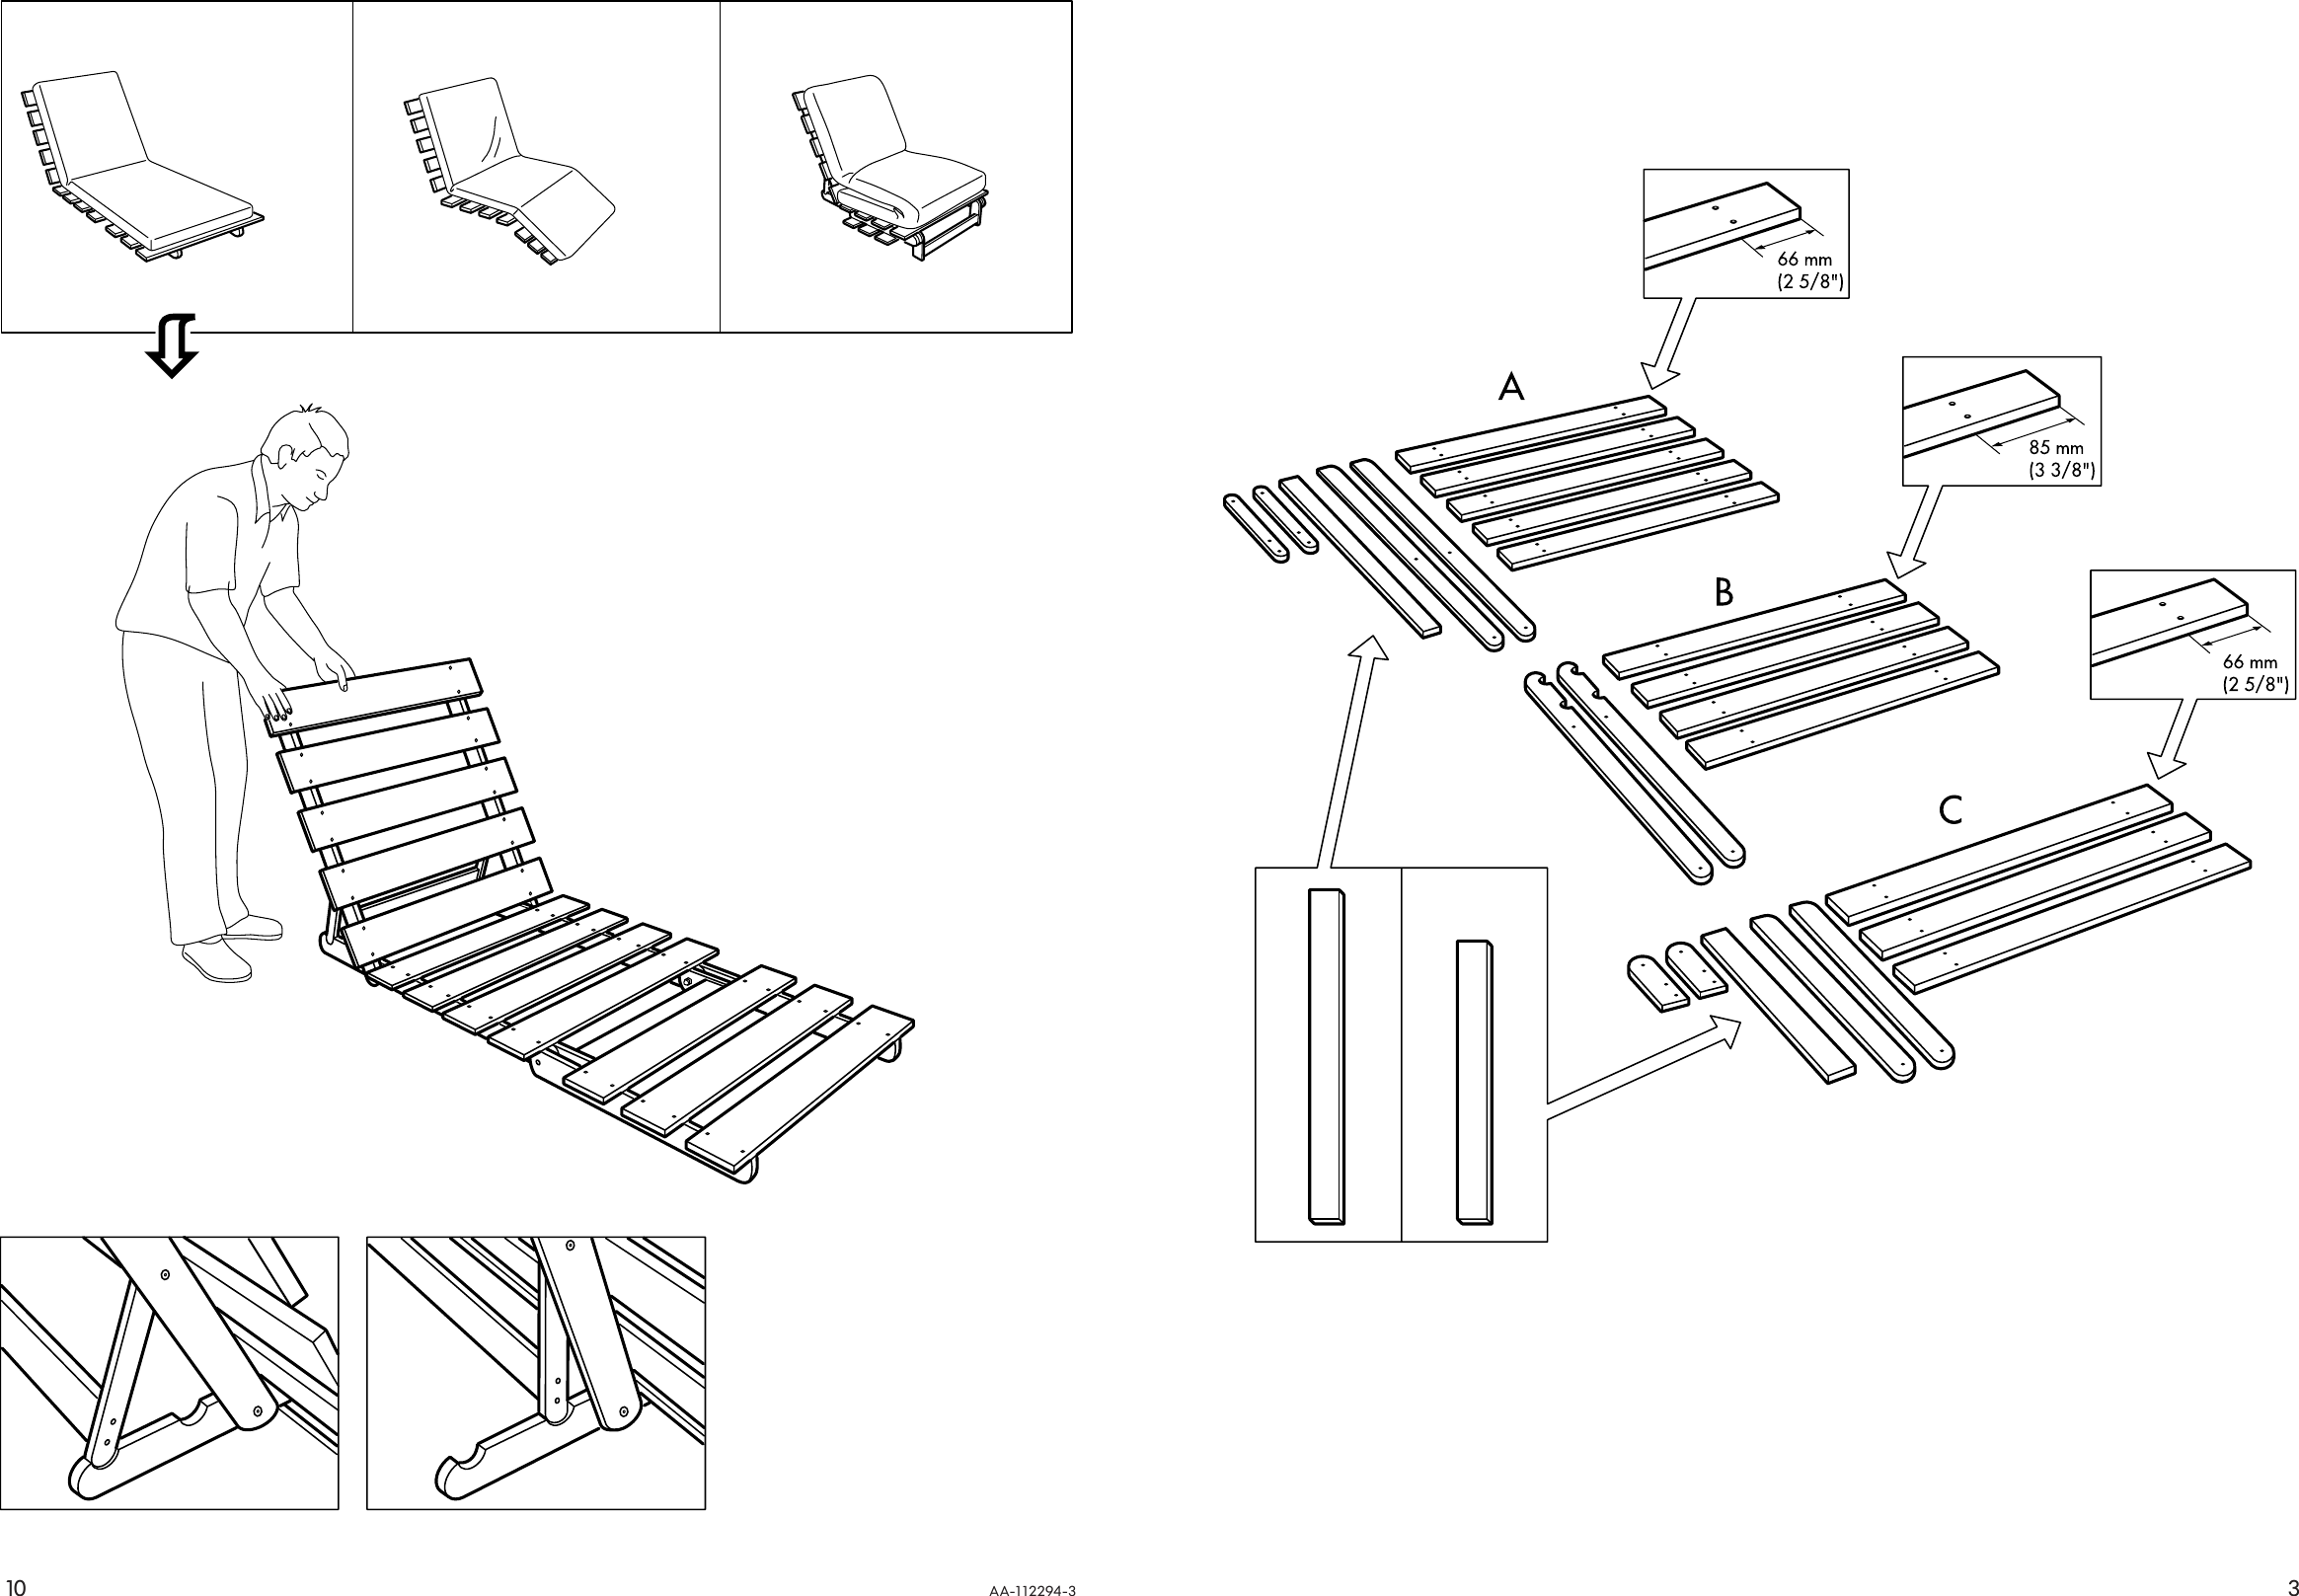 Page 3 of 6 - Ikea Ikea-Grankulla-Futon-Chair-Frame-28X43X32-Assembly-Instruction